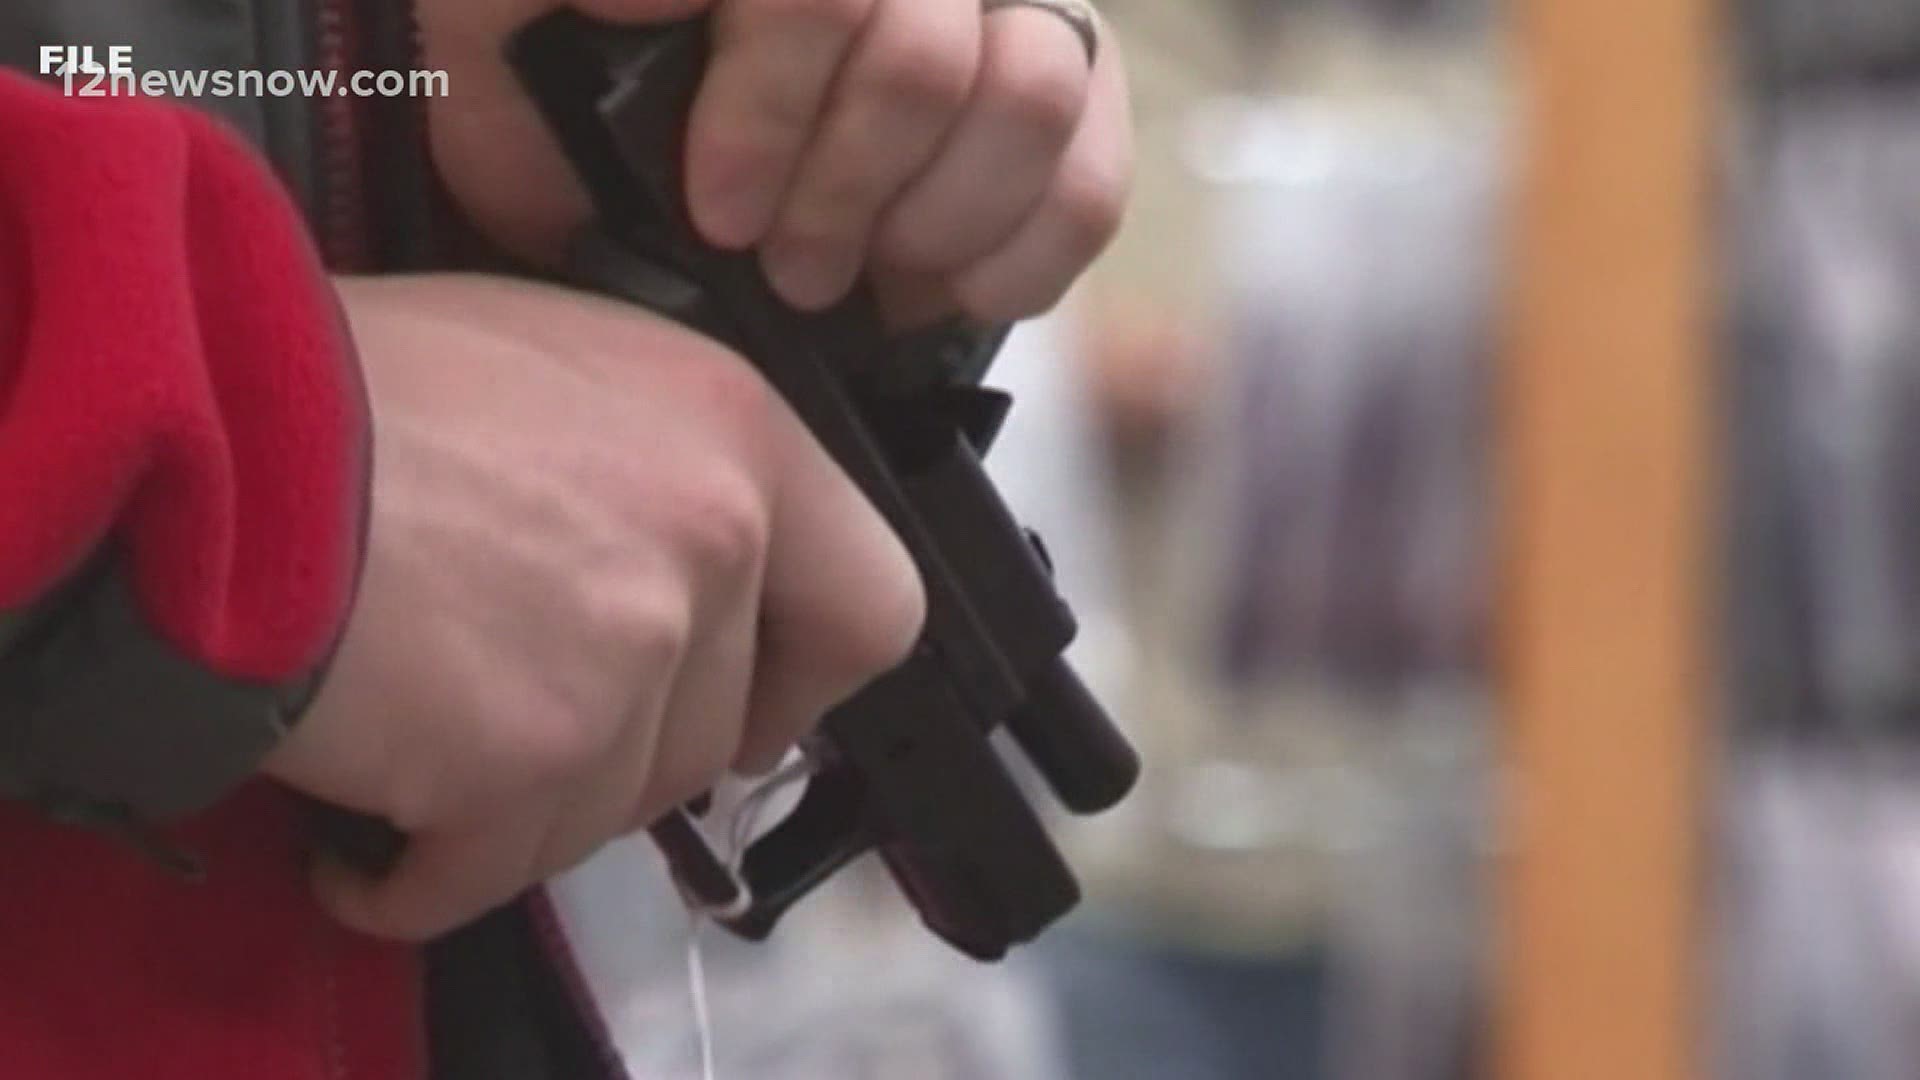 The bill proposed by senator Bob Hall is one of several aiming to address school safety.